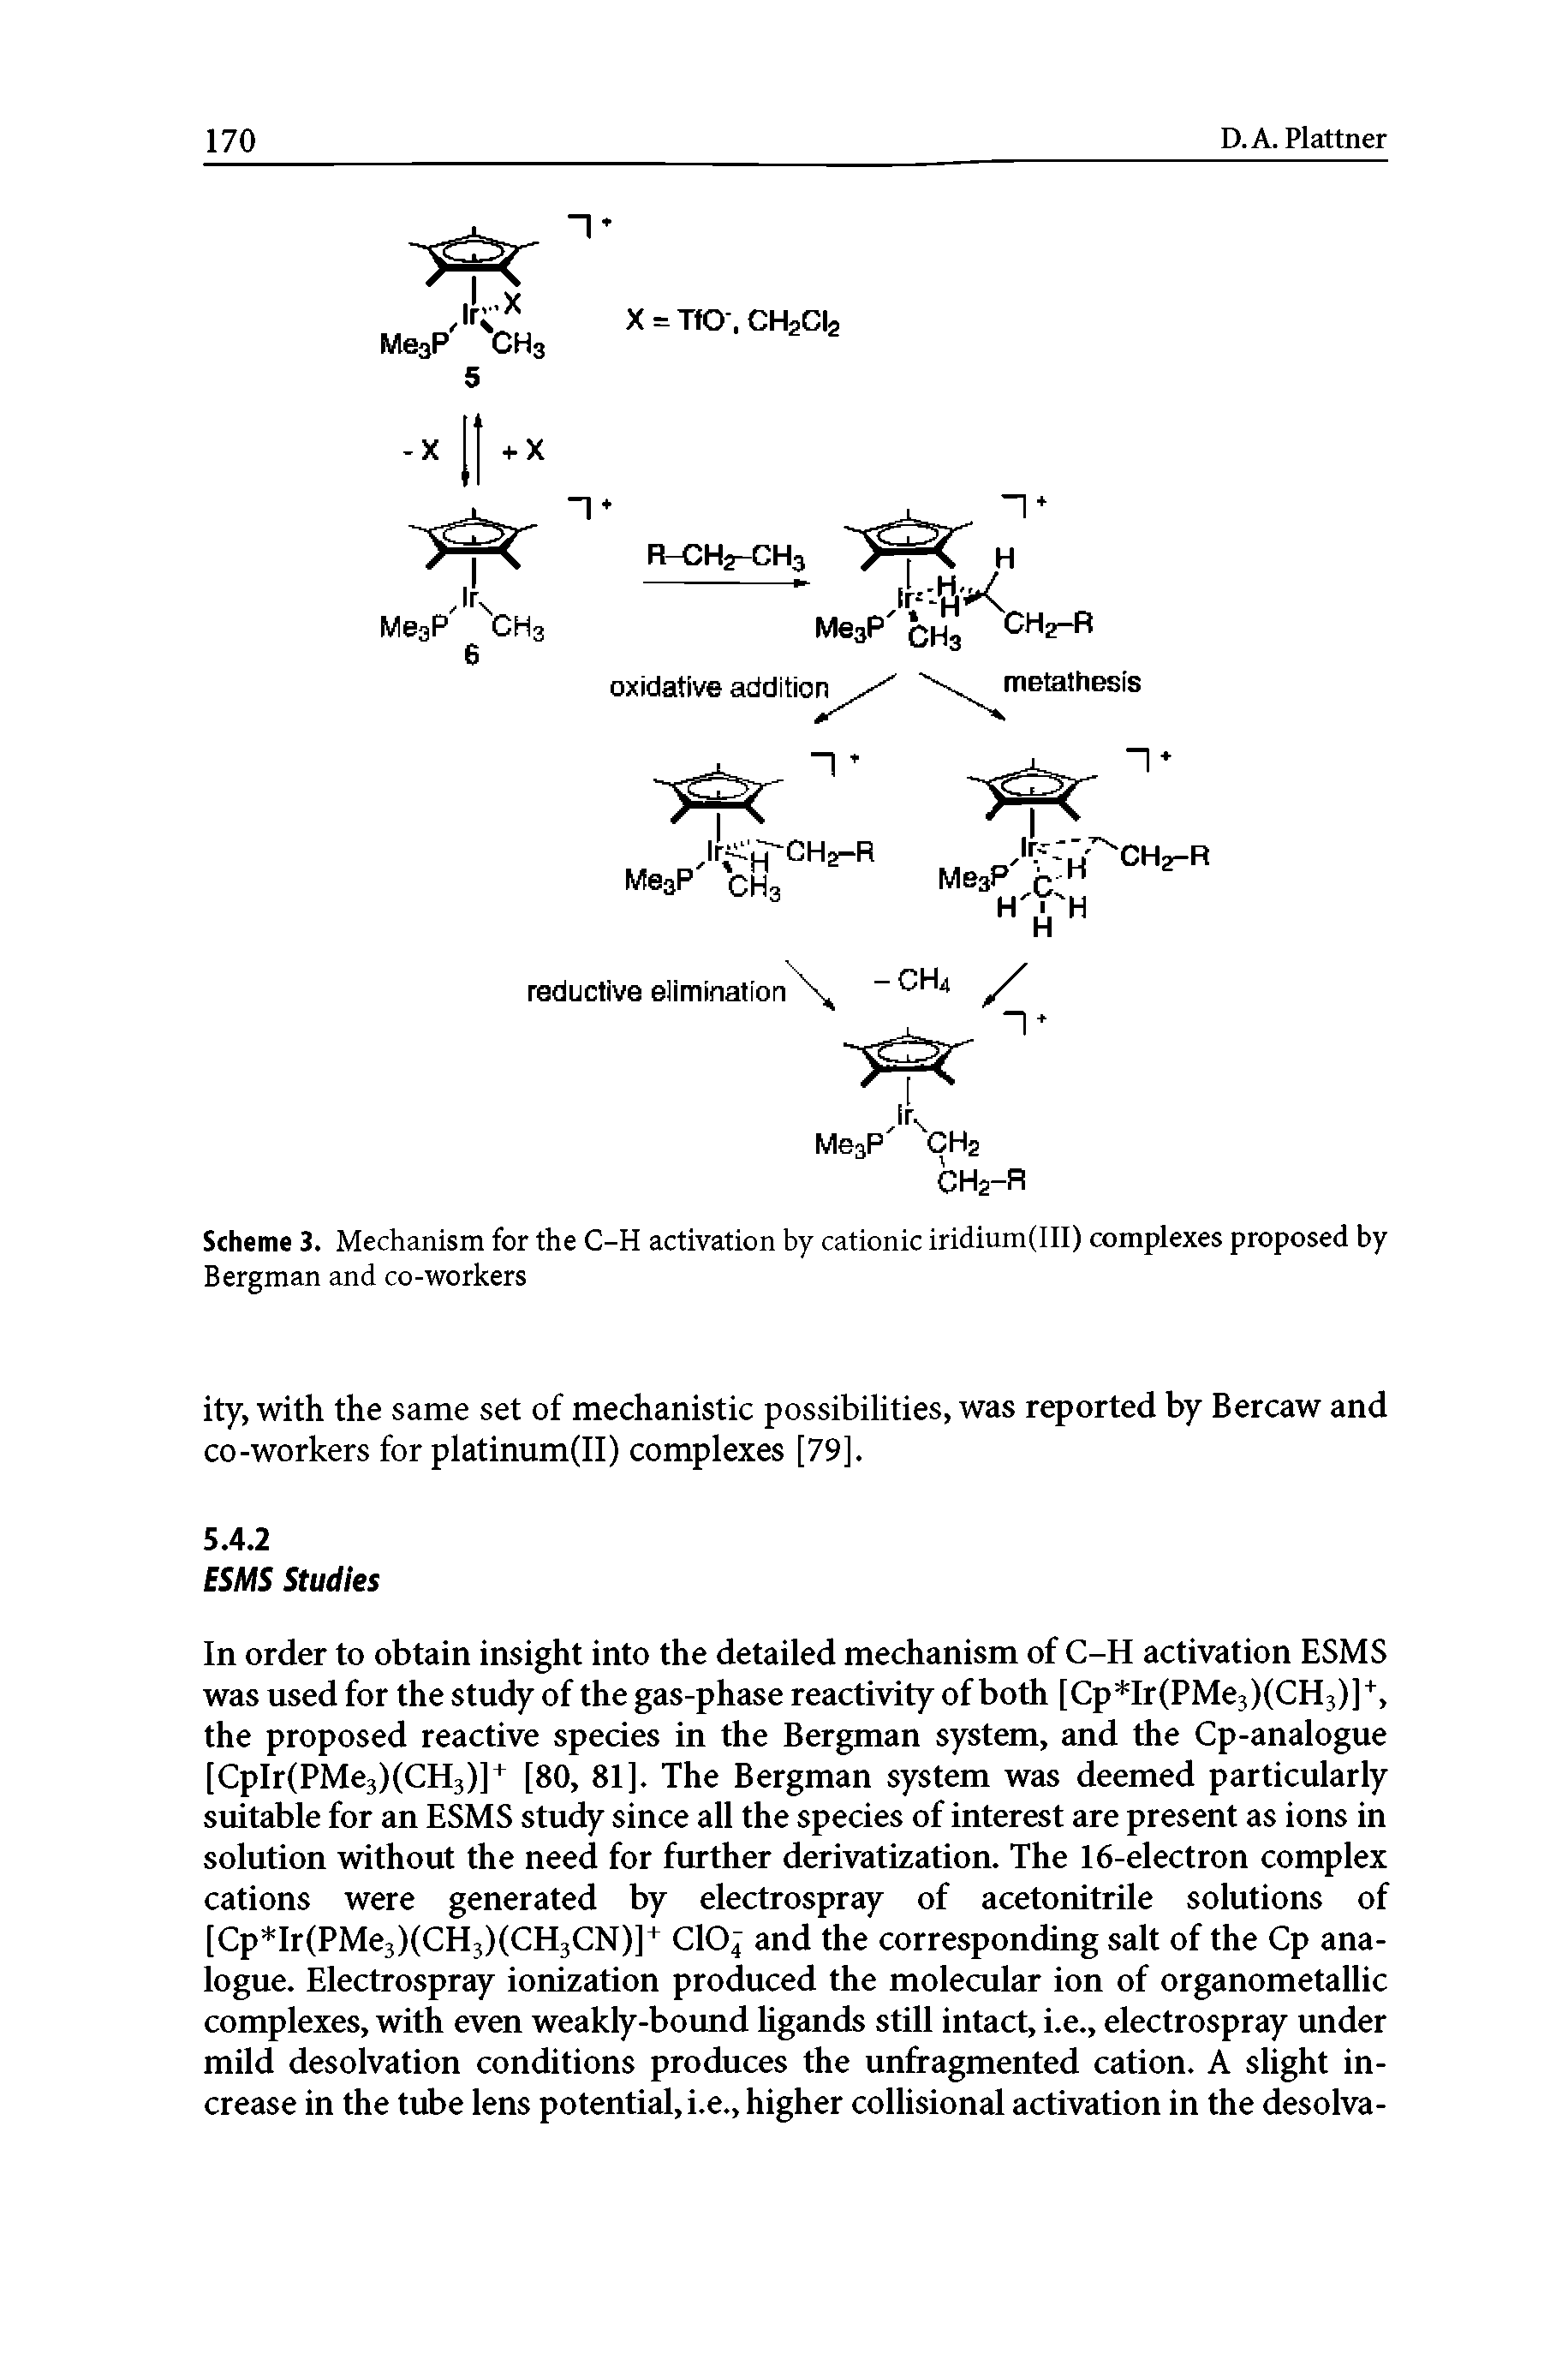 Scheme 3. Mechanism for the C-H activation by cationic iridium(III) complexes proposed by Bergman and co-workers...